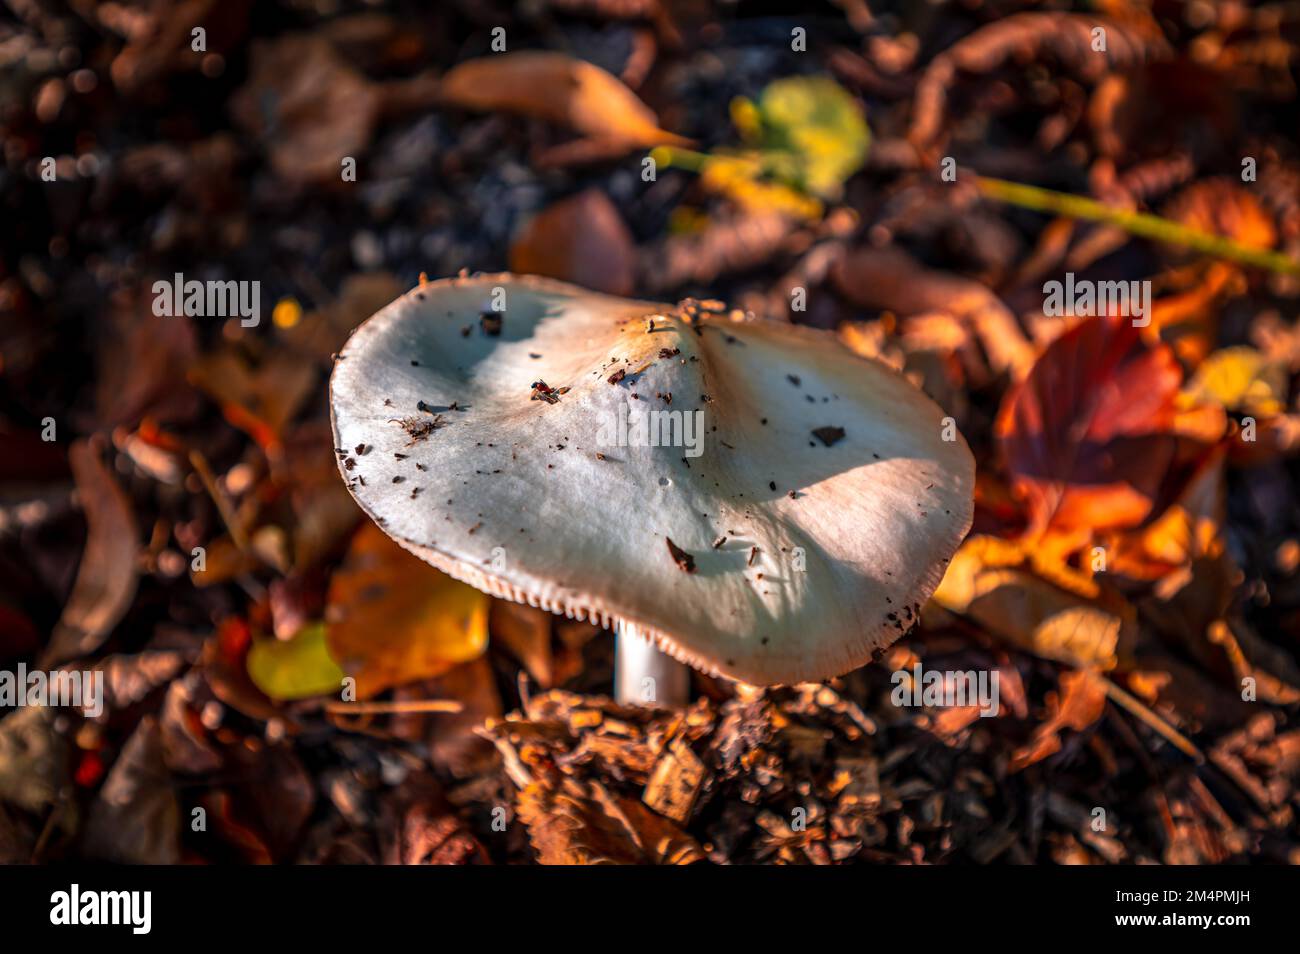 The spring tuber leaf fungus (Amanita verna) grows through the leaf-covered ground in the forest, Hanover, Lower Saxony, Germany Stock Photo